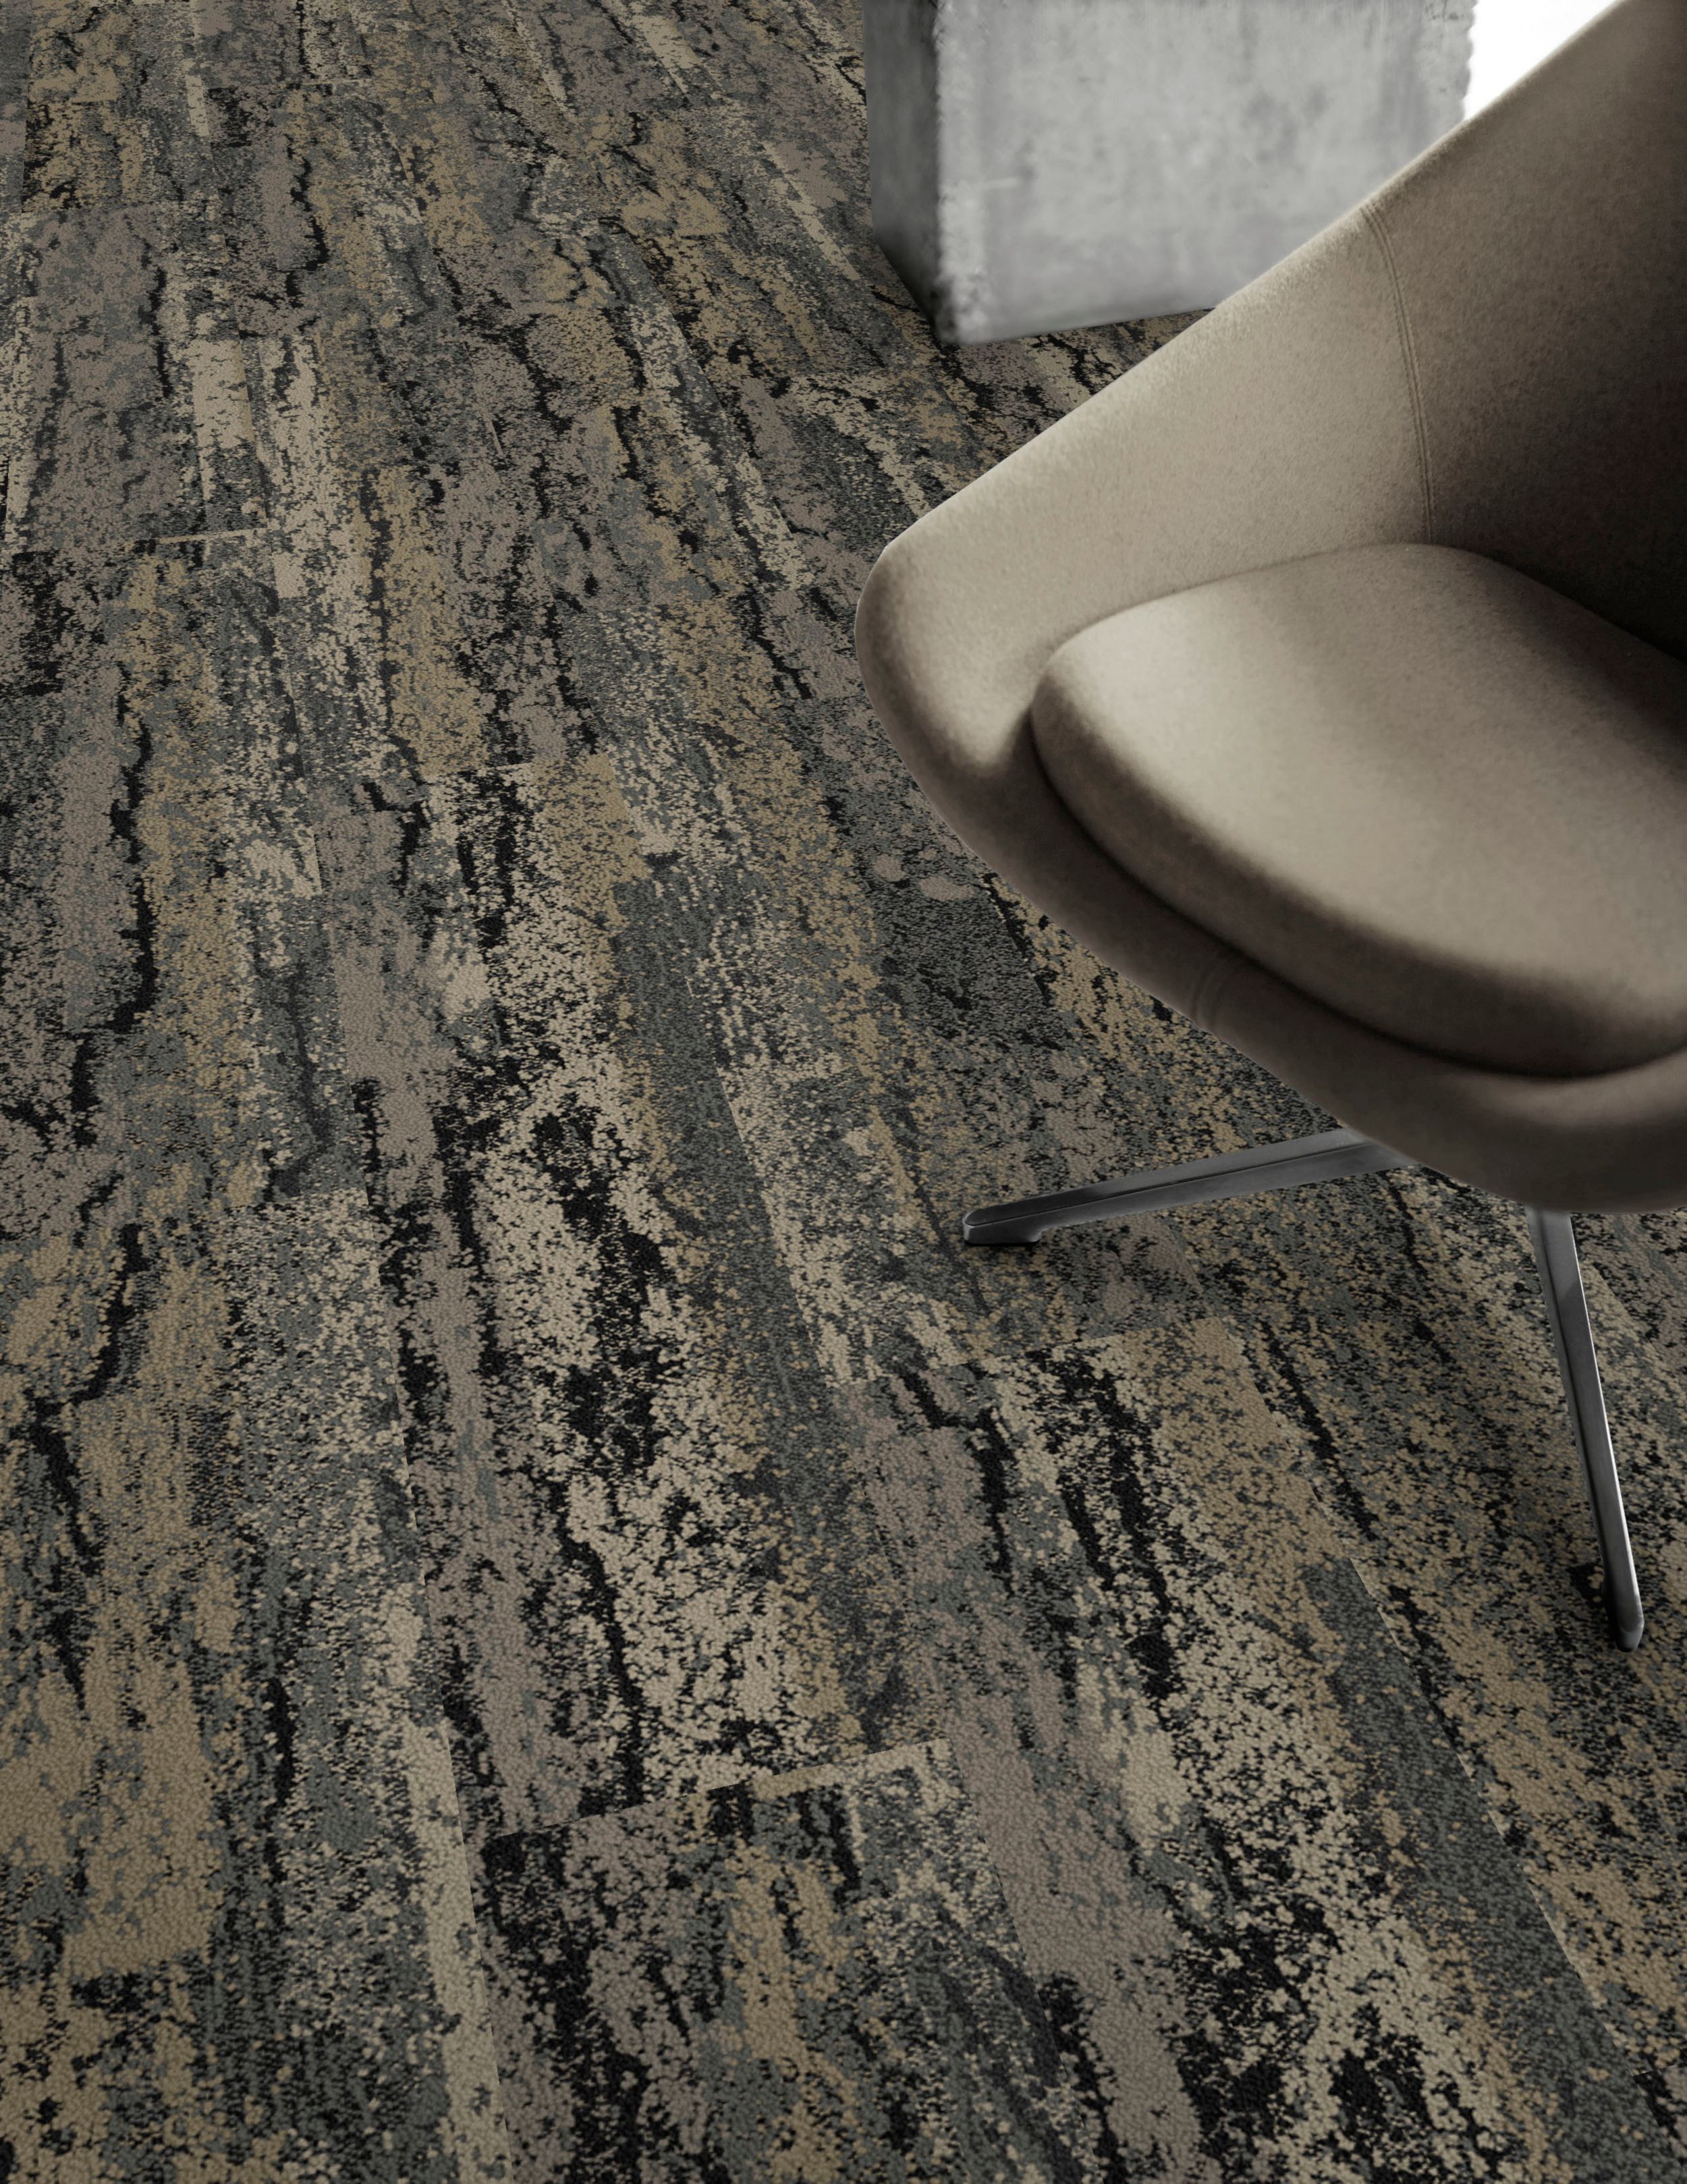 Deeply Rooted: by Collection Neck Carpet Tile the Woods of Interface